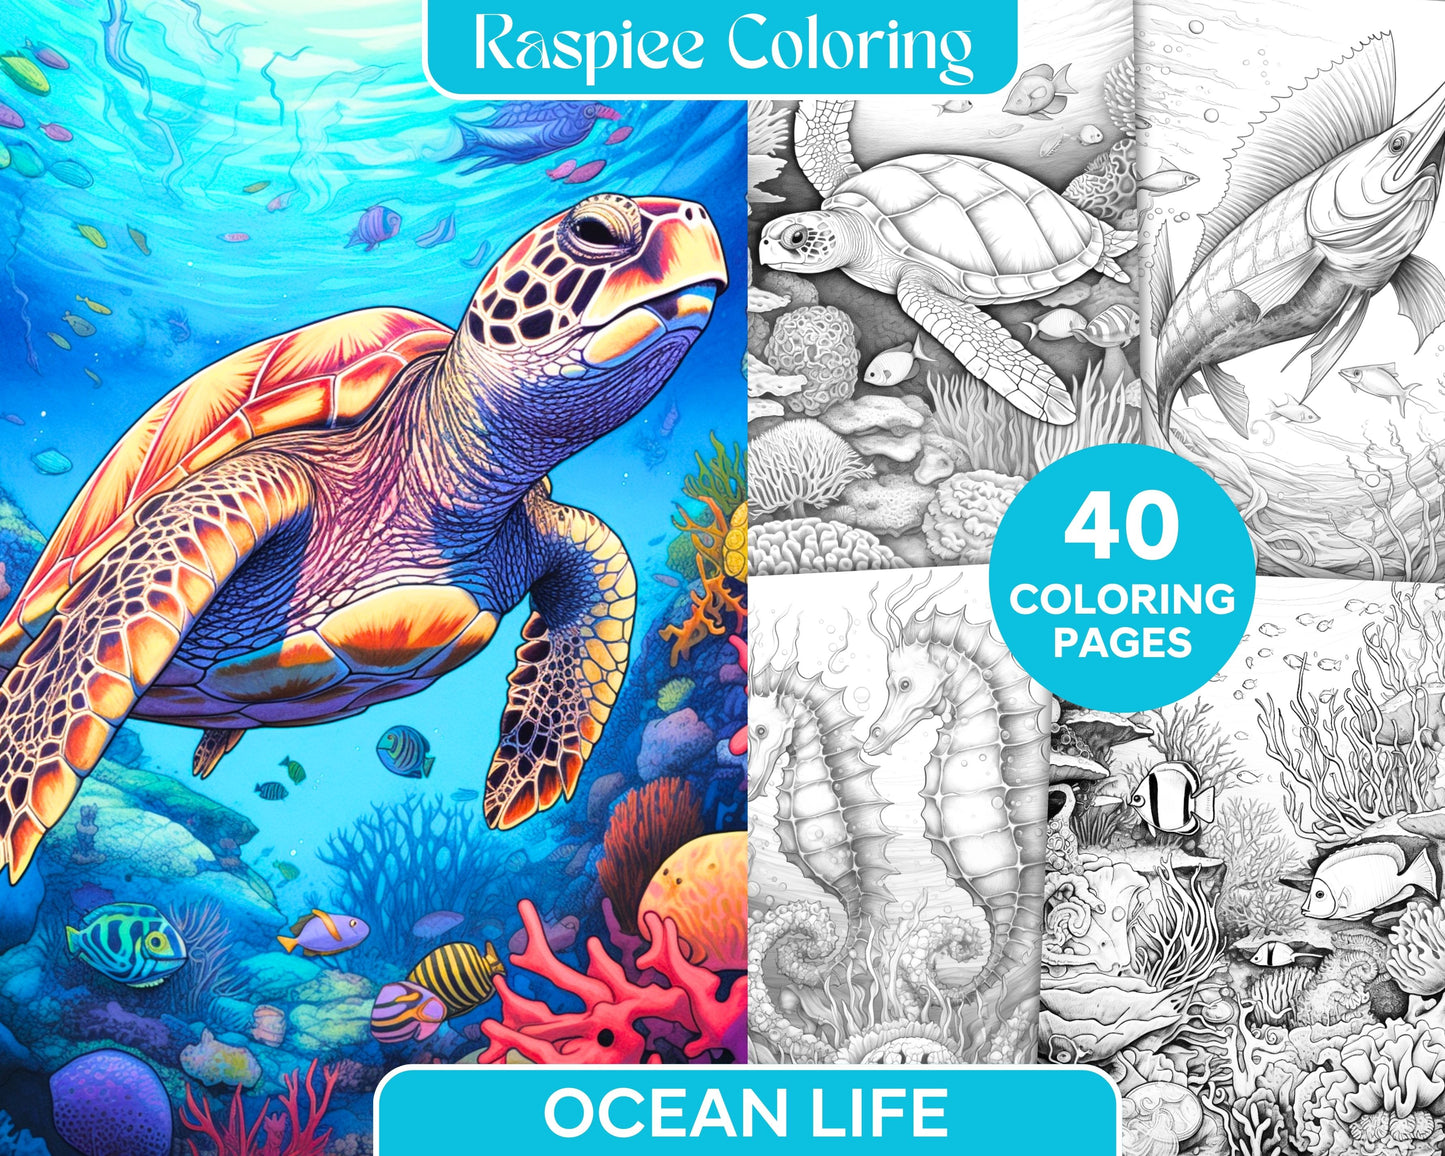 Ocean Life Grayscale Coloring Pages, Printable for Adults, Relaxing Underwater Art